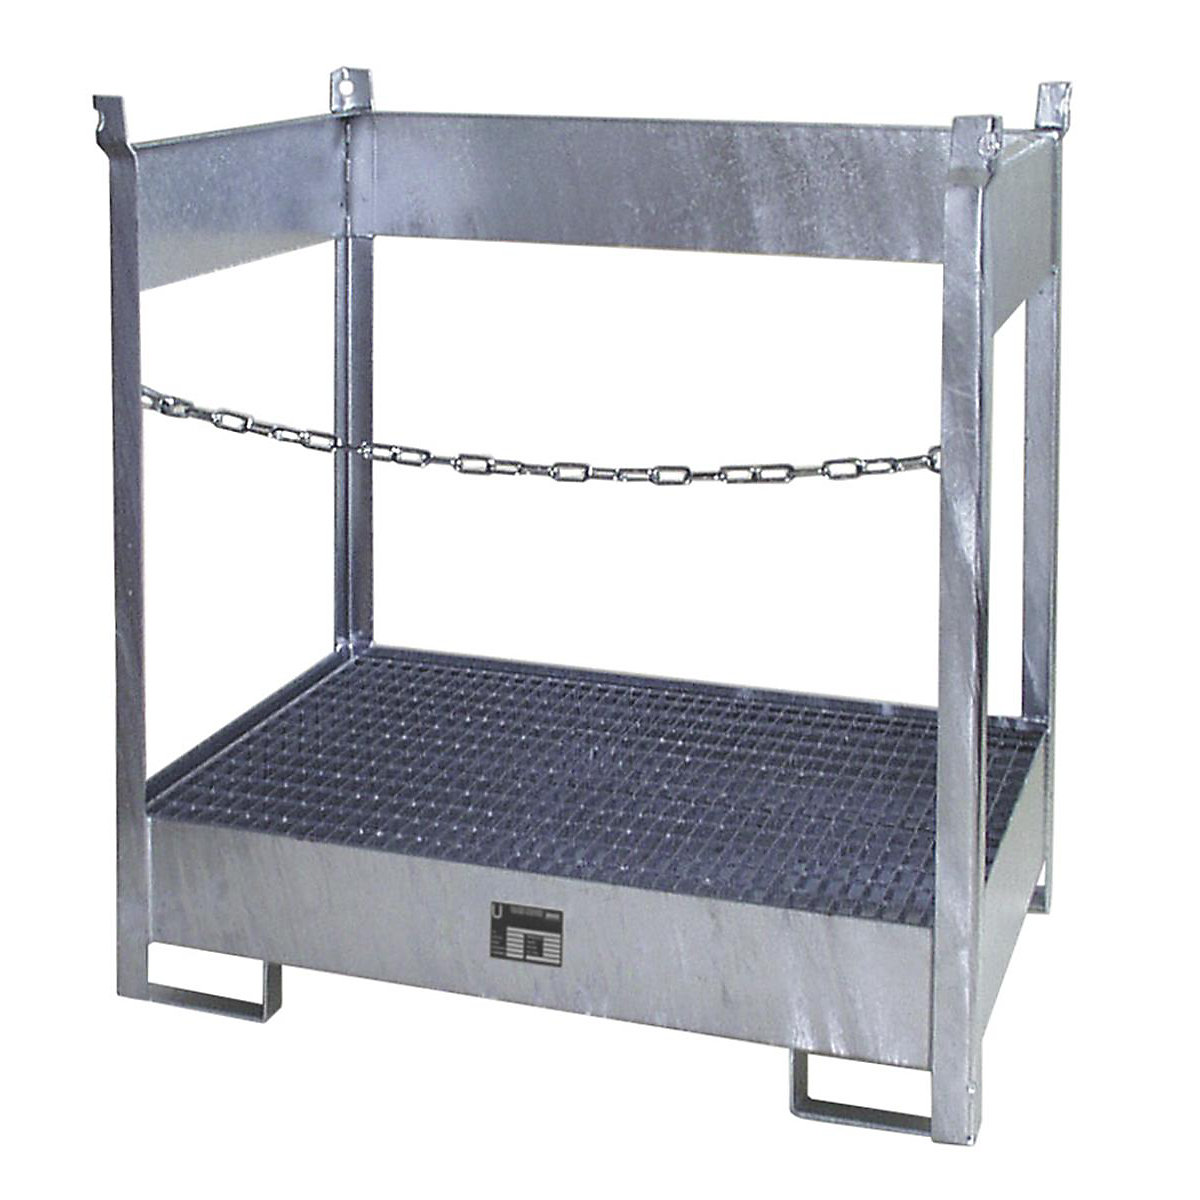 Storage and transport pallet with sump tray – eurokraft pro, open on all sides, stackable, for 2 drums, zinc plated-2